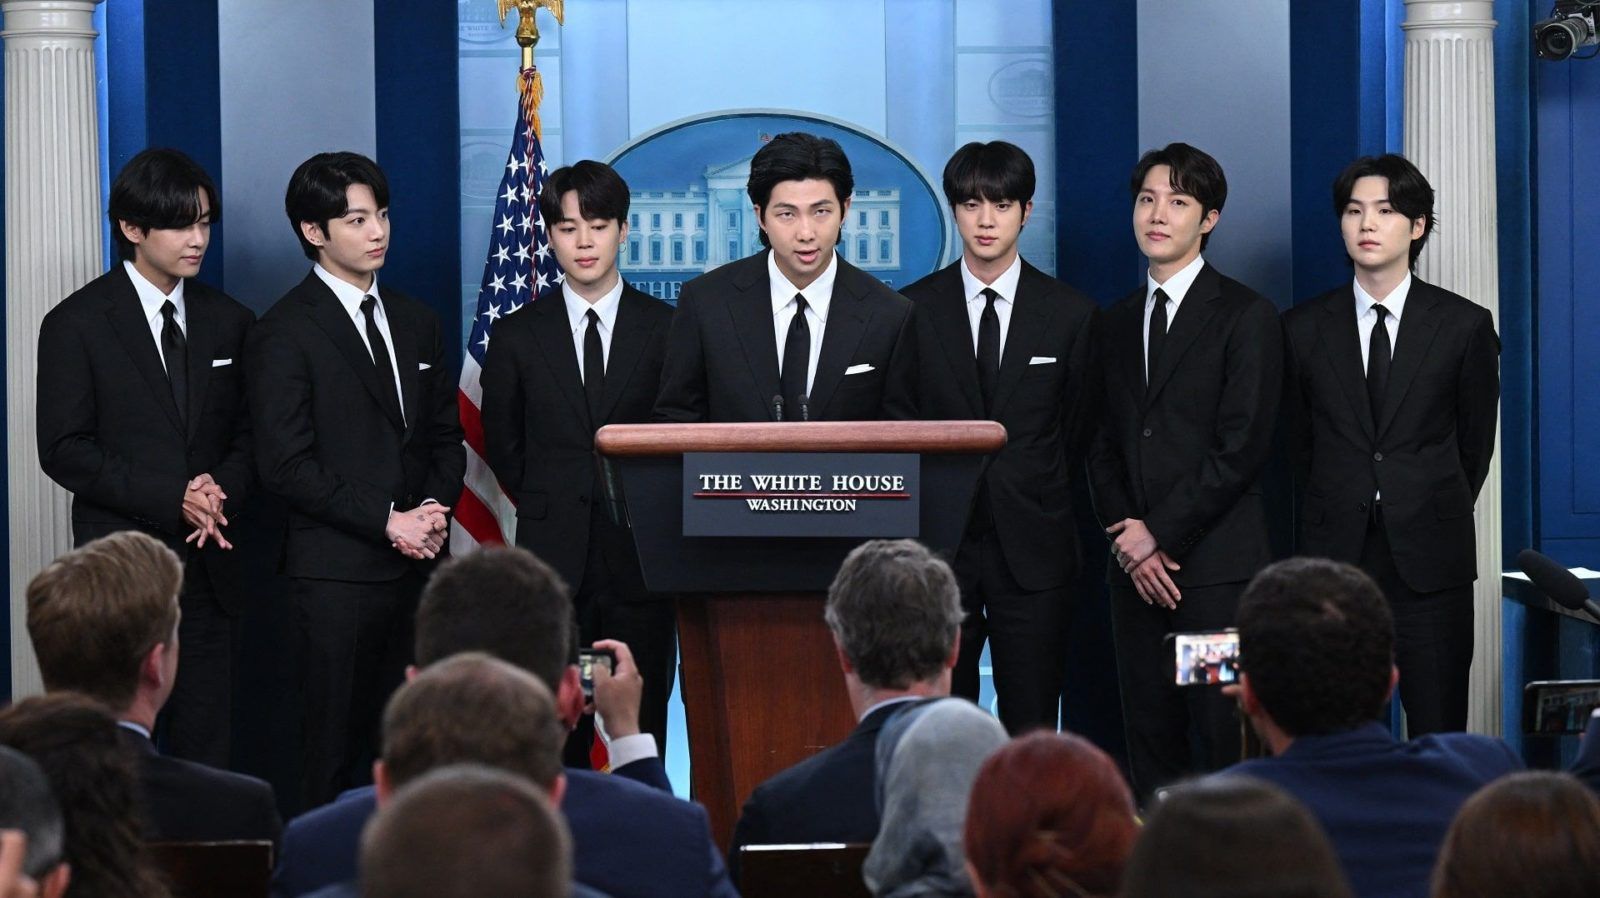 BTS discusses anti-Asian hate crimes at White House